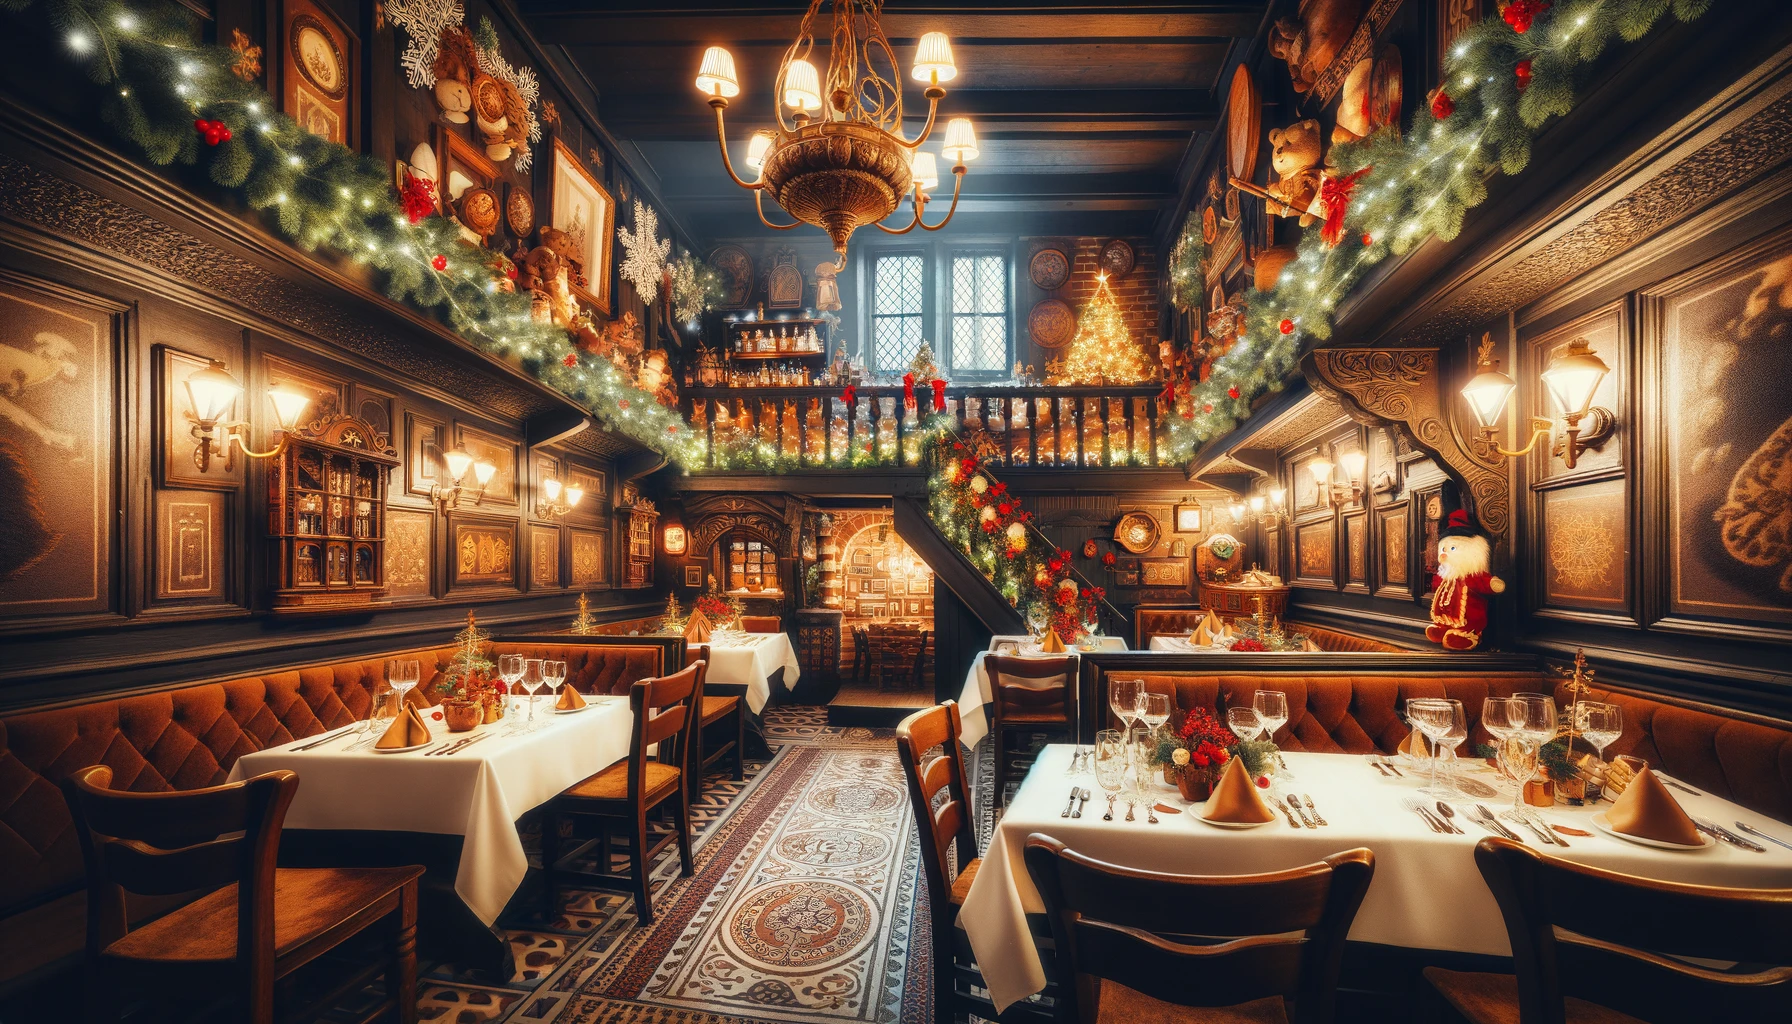 Elegant New Year's Eve Dining in a Traditional Polish Restaurant in Gdansk